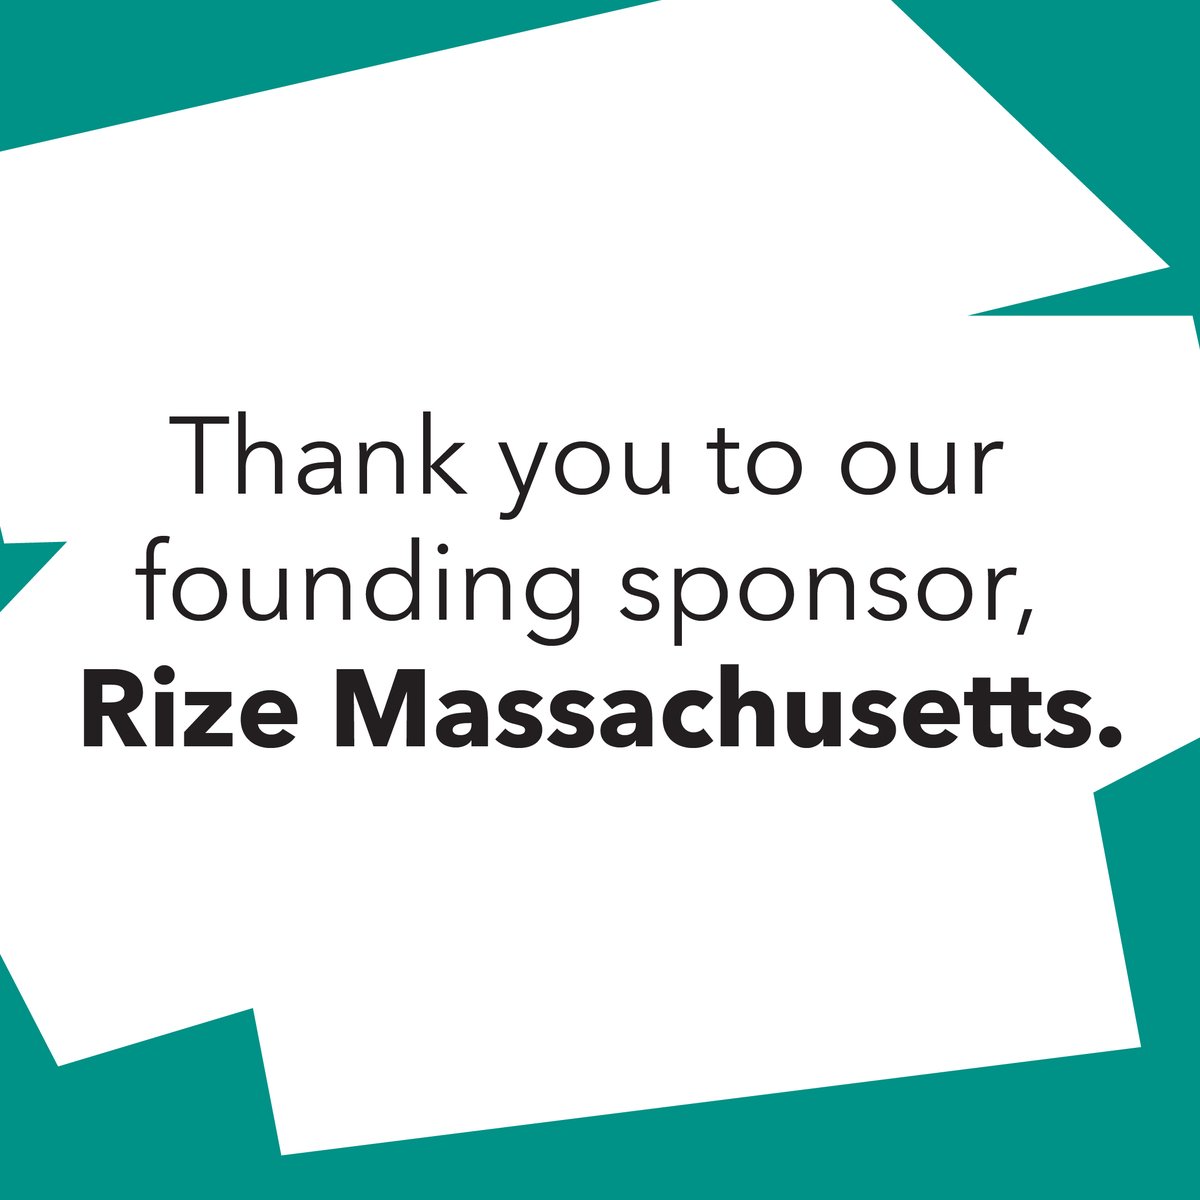 We’re incredibly grateful to partner with @RIZEMass, our founding sponsor of Together for Hope: Boston Addiction Conference 2024! If you are interested in sponsorship opportunities for Together for Hope, please contact partnerships@bmc.org.